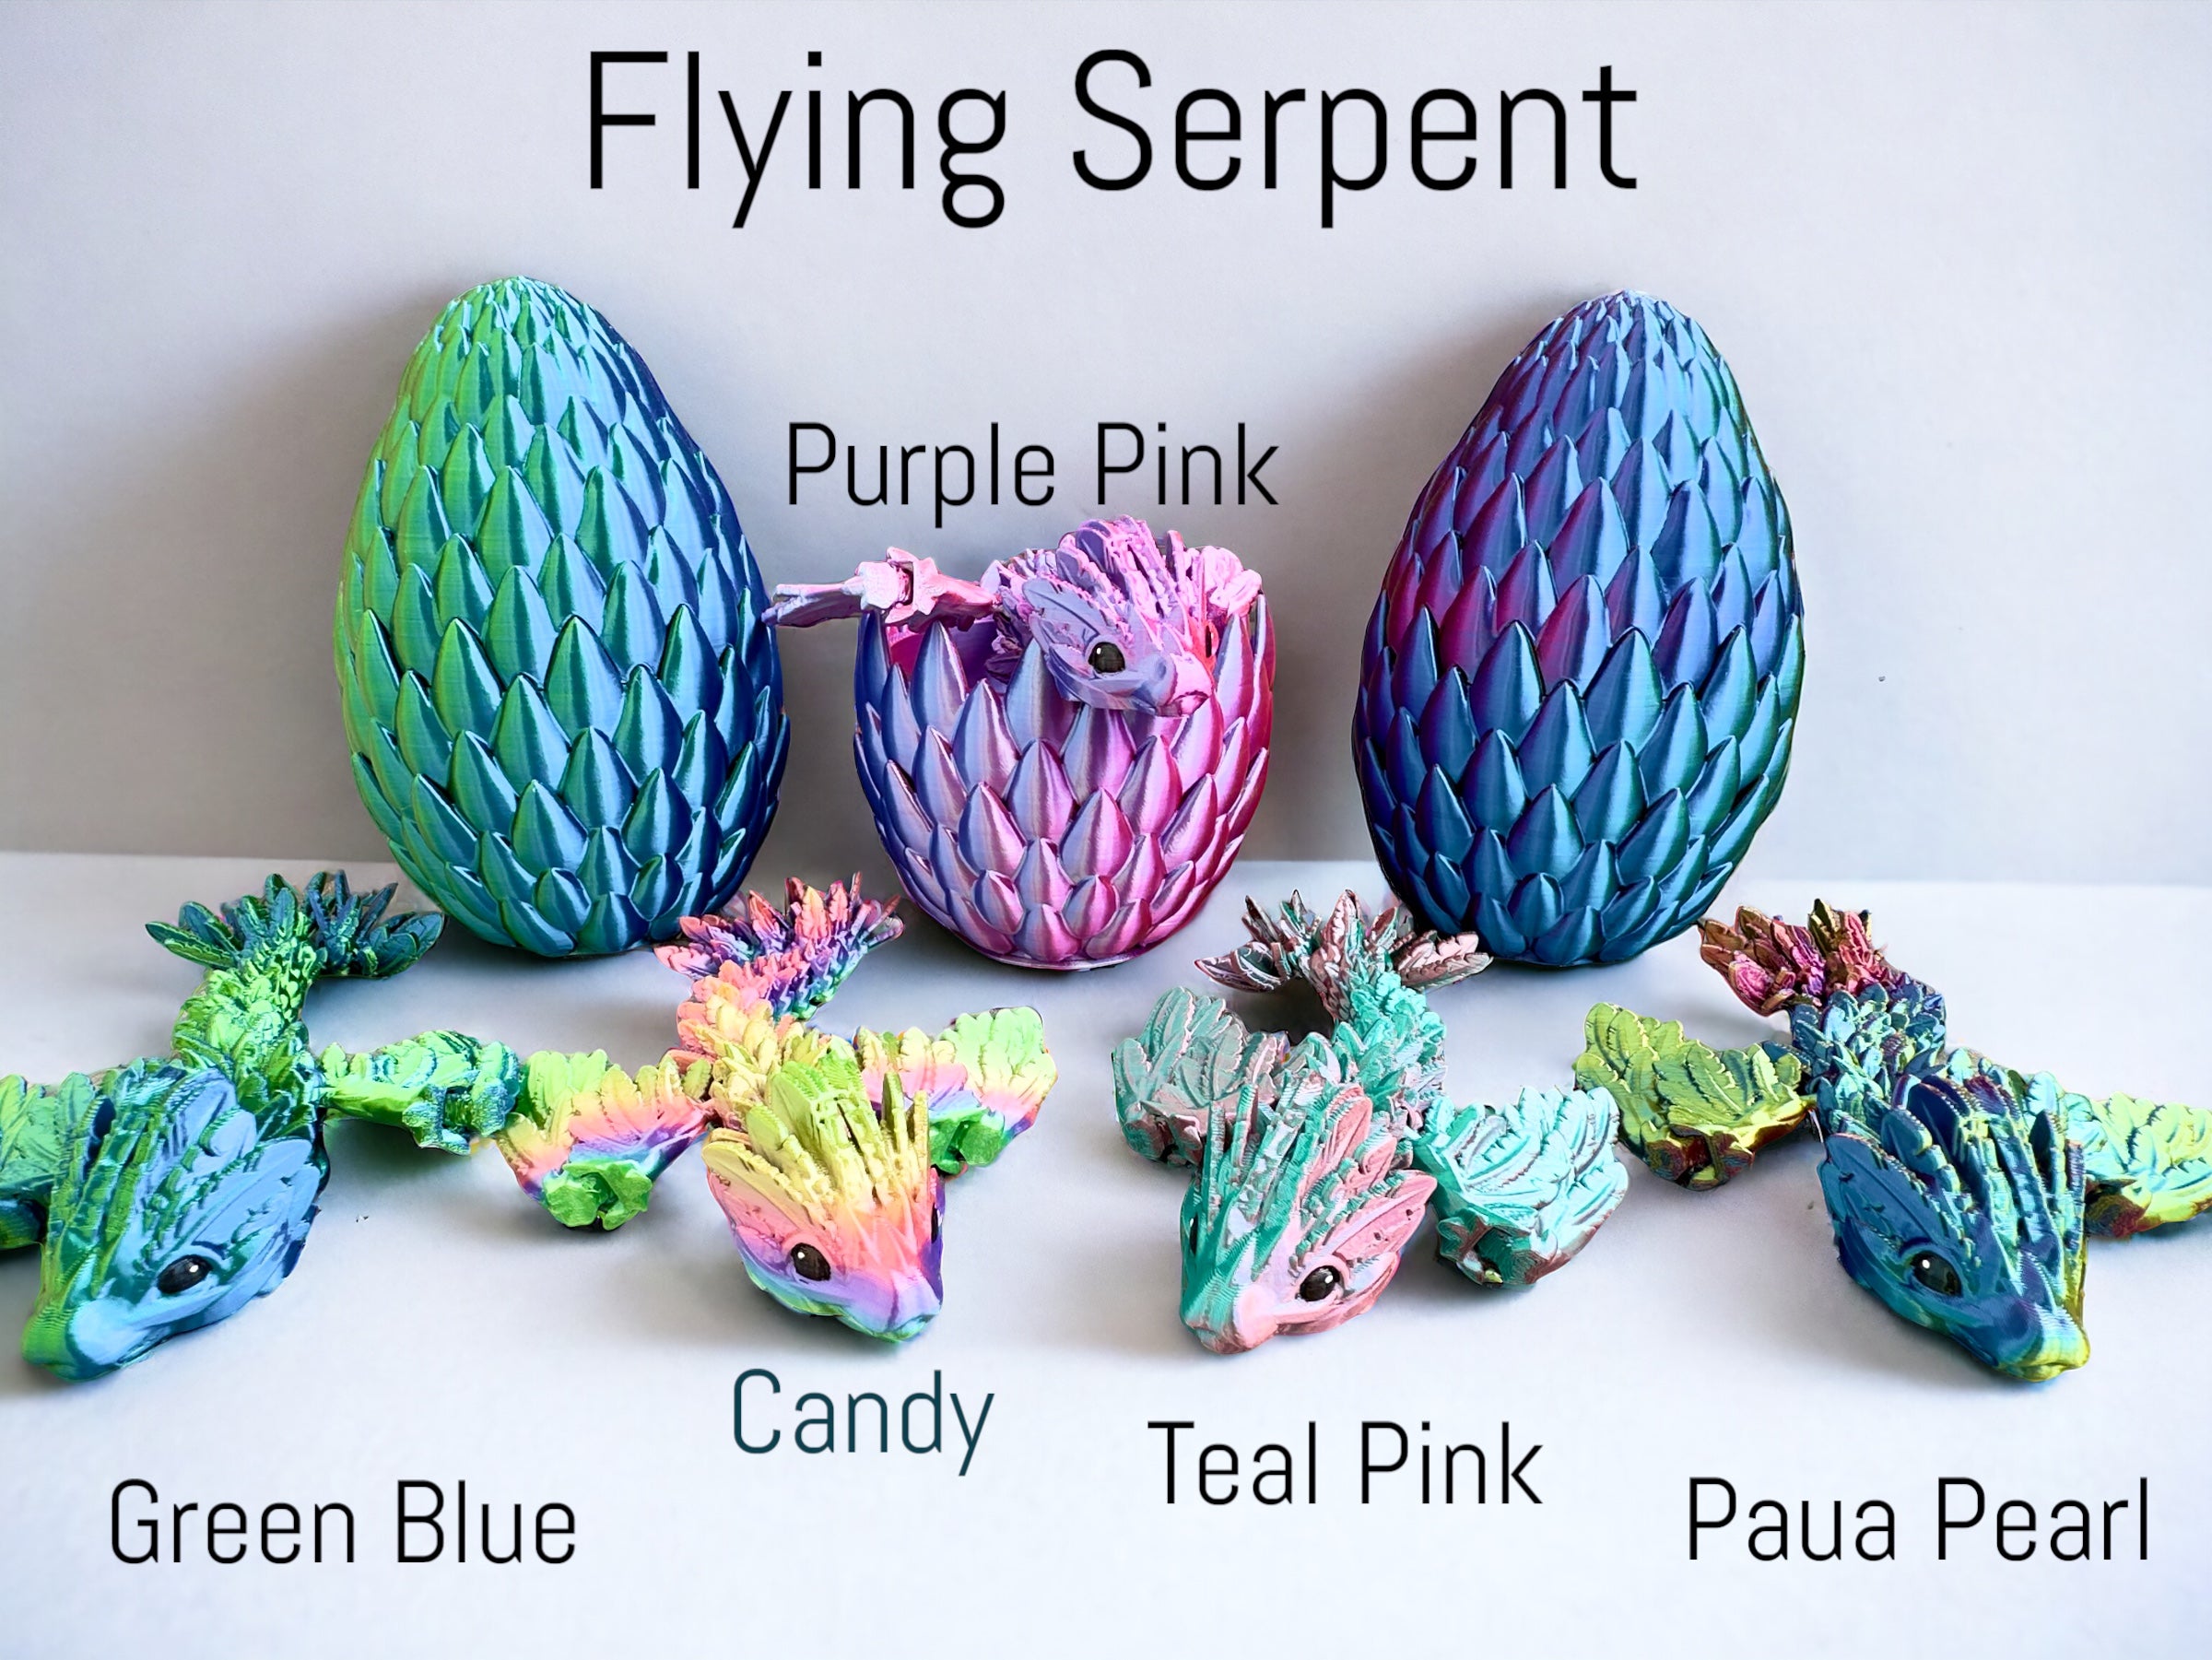 3D Printed Articulated Flying Dragon and Egg Fidget Toy, Dragon Figurine Toys